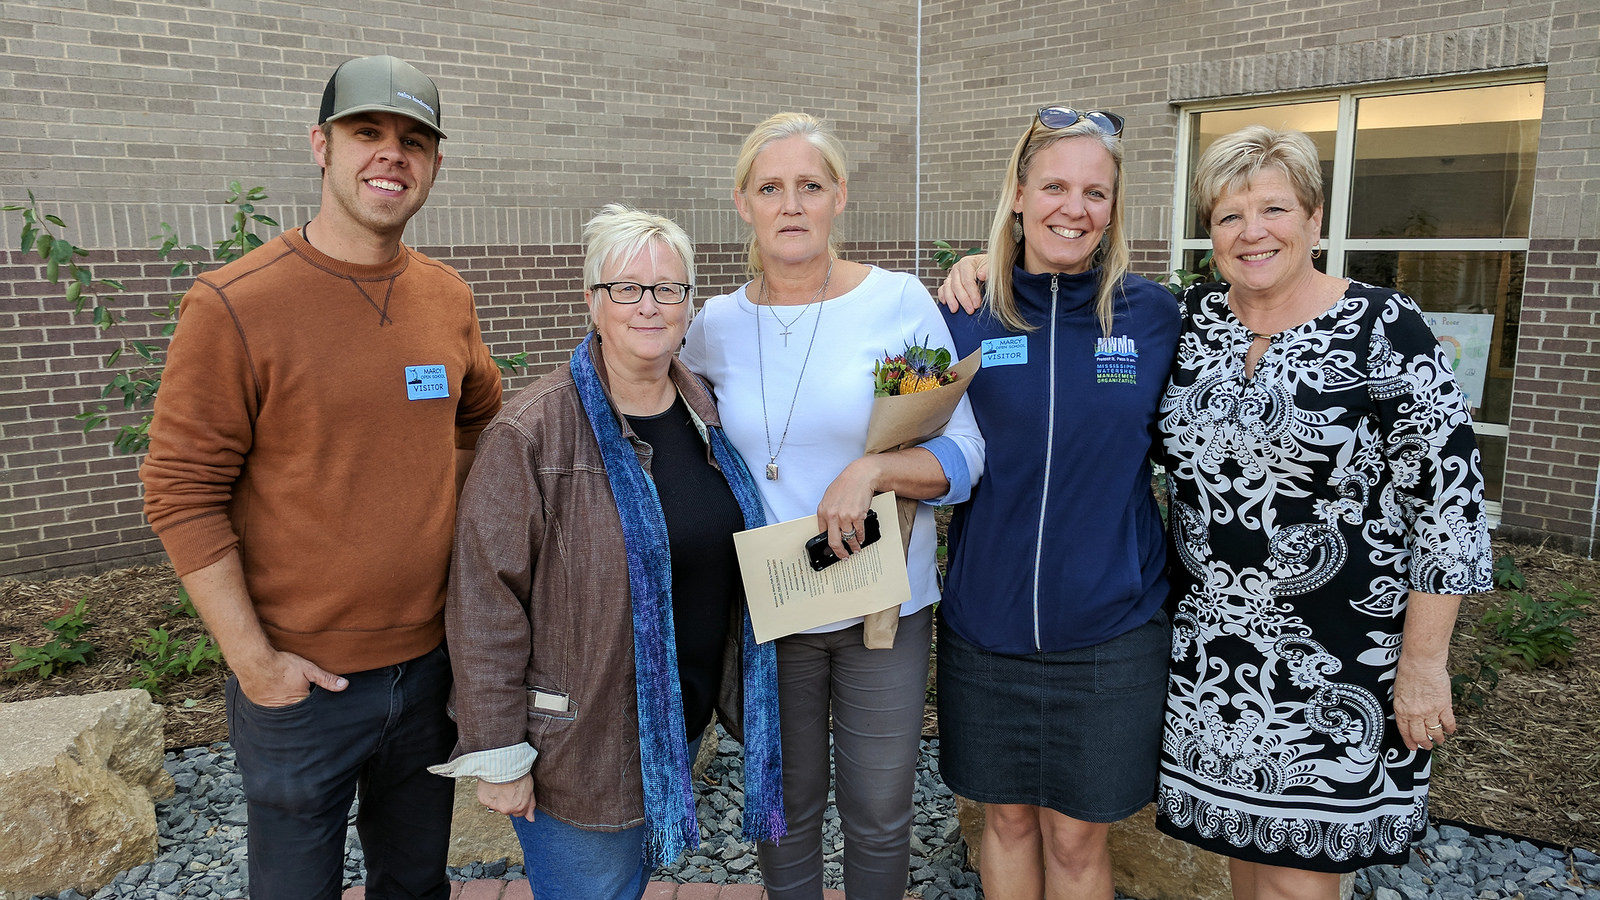 From left: Brian Nelson of Nelco Landscaping, Marcy Open School parent alumna Catherine Conzet, parent council member Jacqueline Dekker Travis, MWMO Professional Training and Development Specialist Abby Moore, and Principal Donna Andrews.